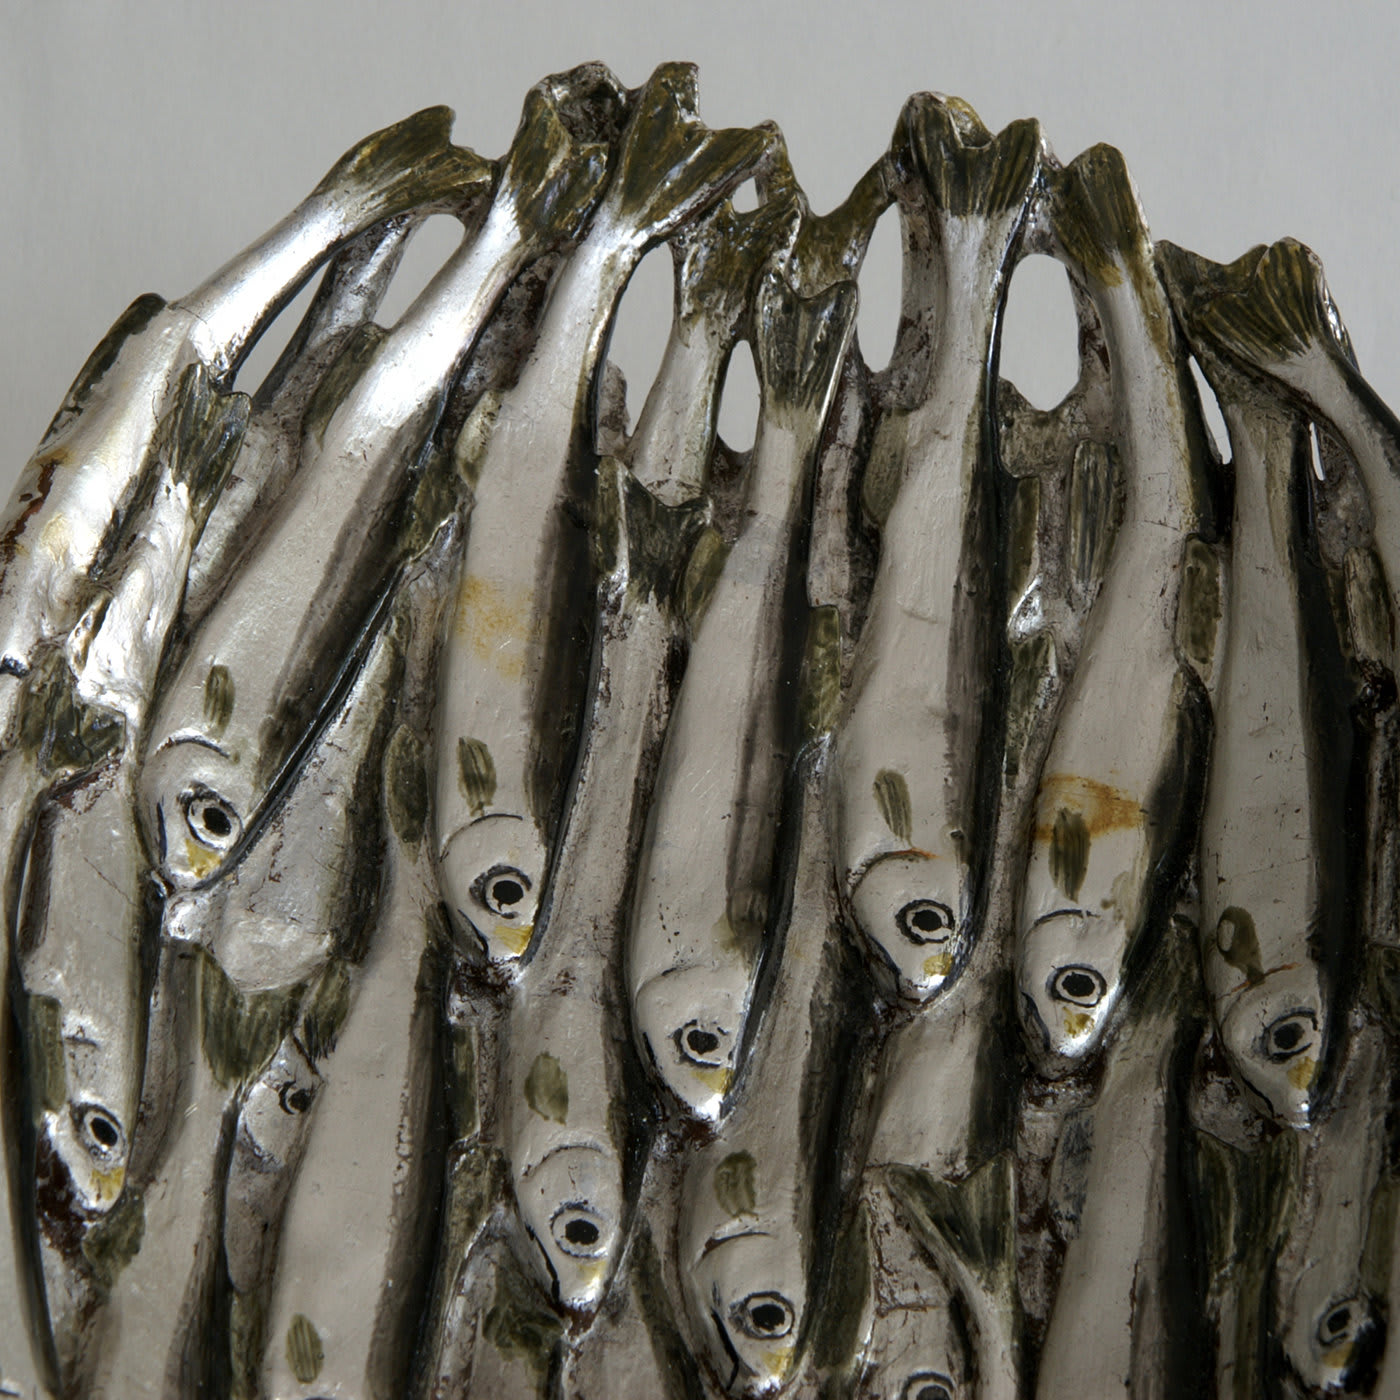 Sculptural Anchovy Tray - Paolo Londero